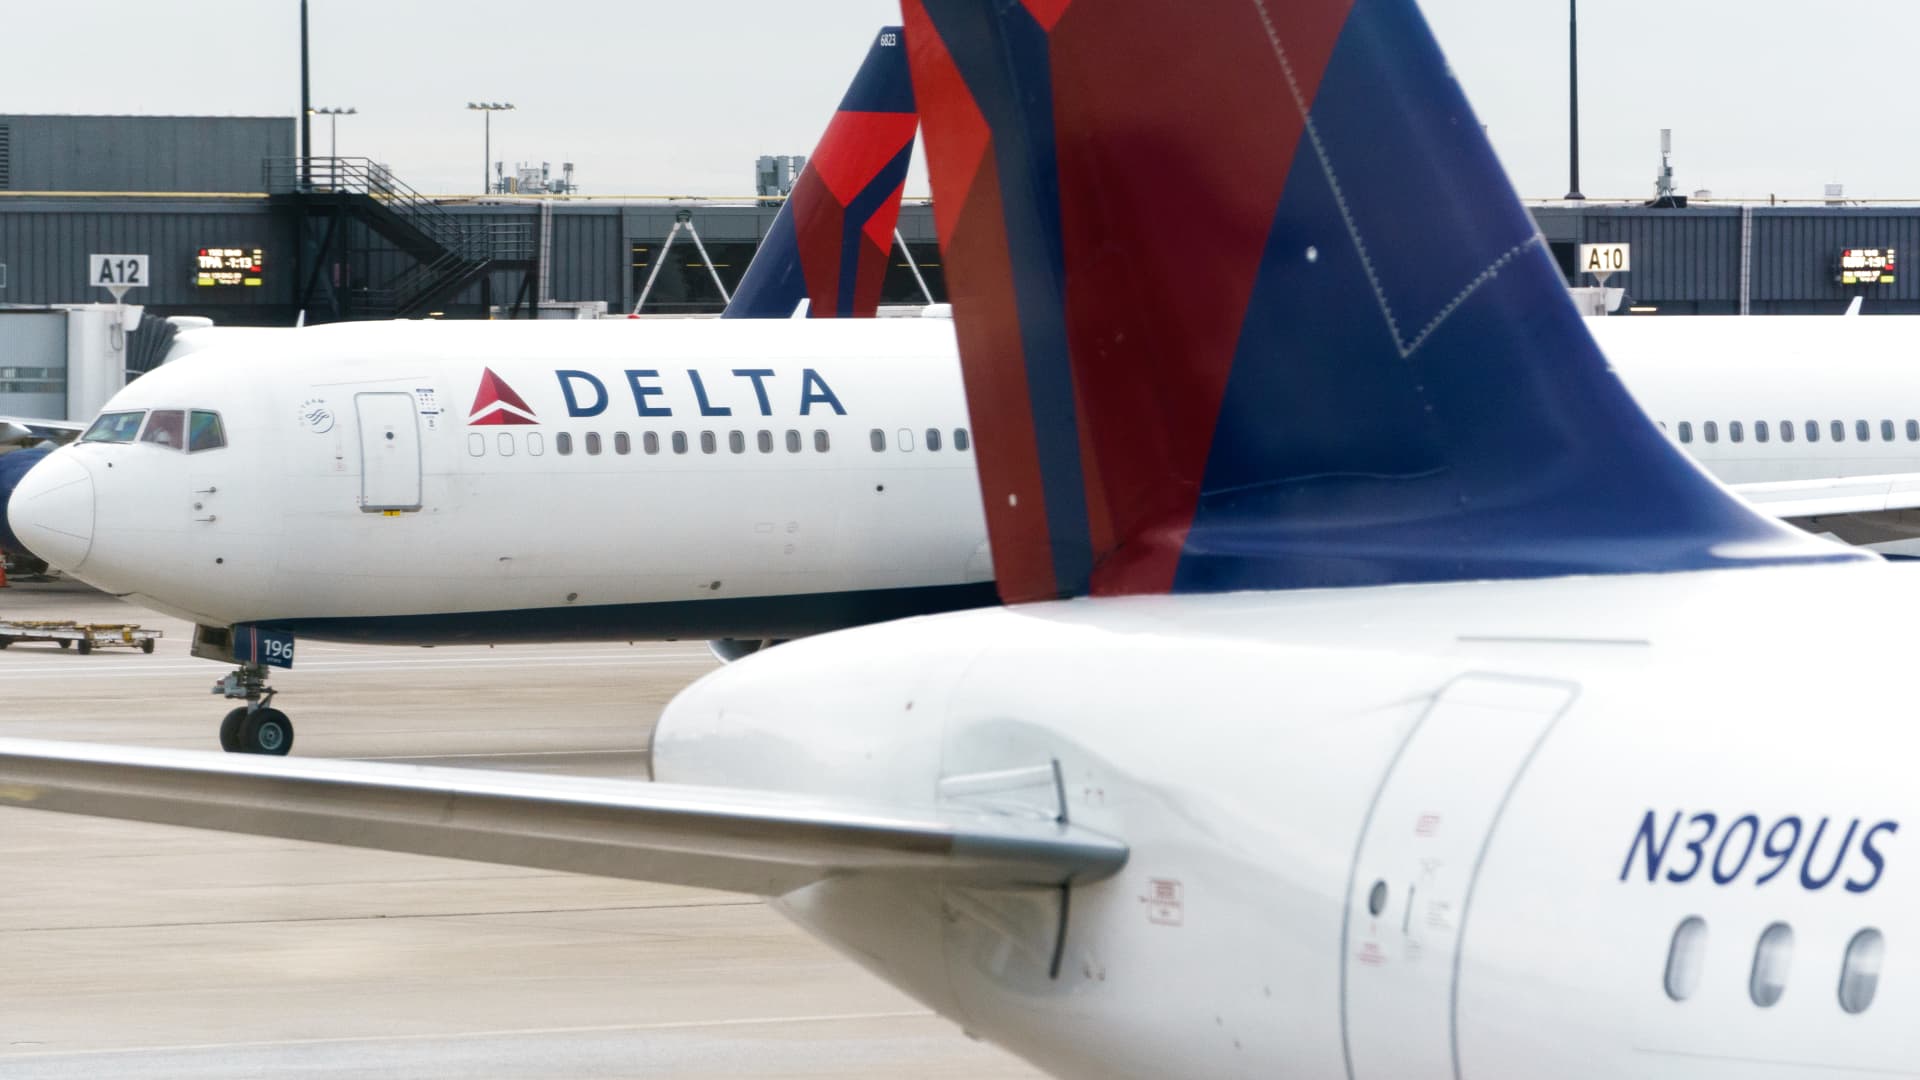 Delta Air Lines posts quarterly loss but forecasts profit as peak travel season approaches